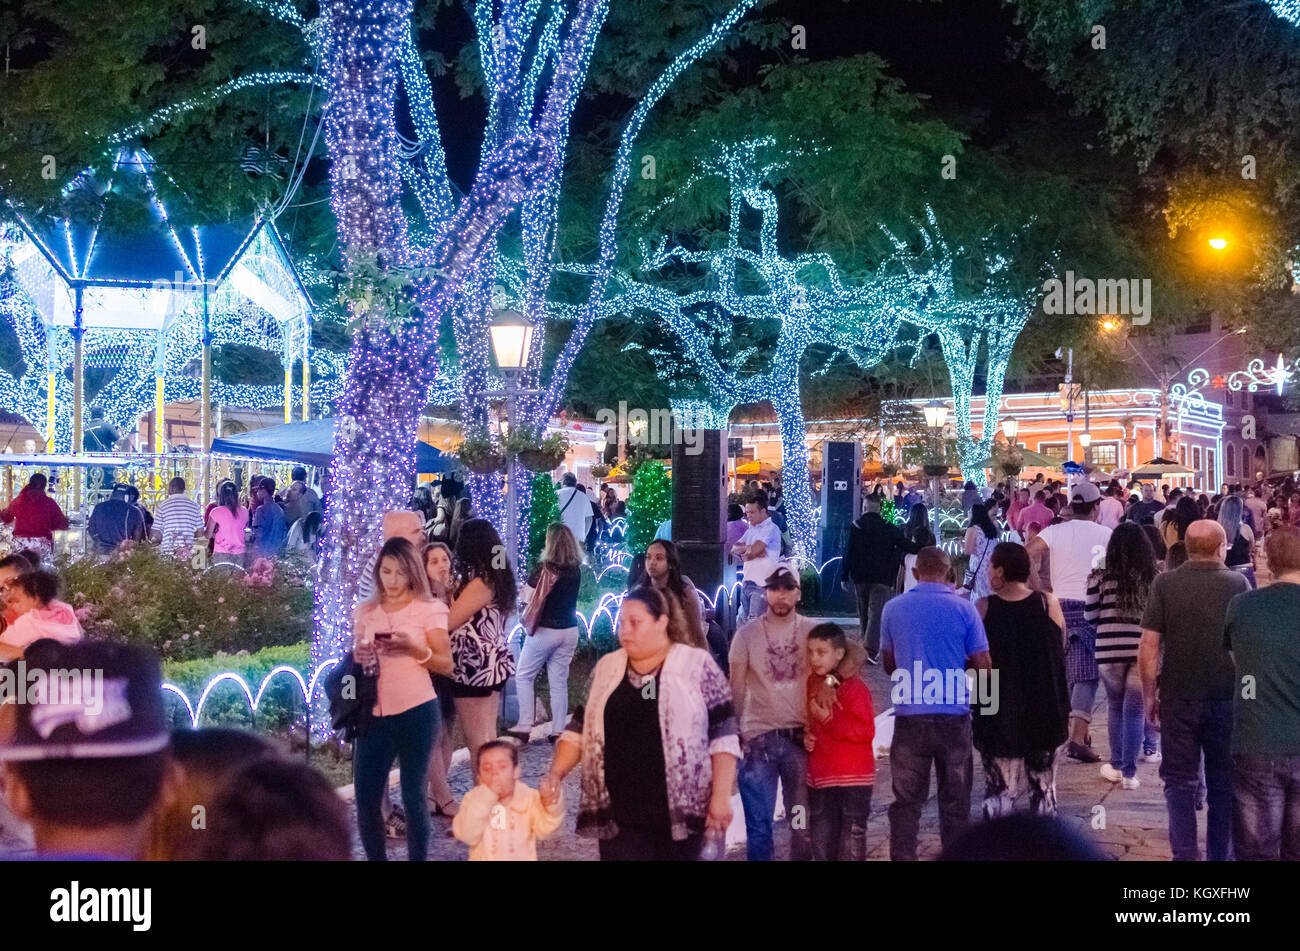 Sao Paulo, Brazil, December 17, 2016: People observe the decoration of Christmas in a public square in the city of Santana de Paranaiba municipality o Stock Photo